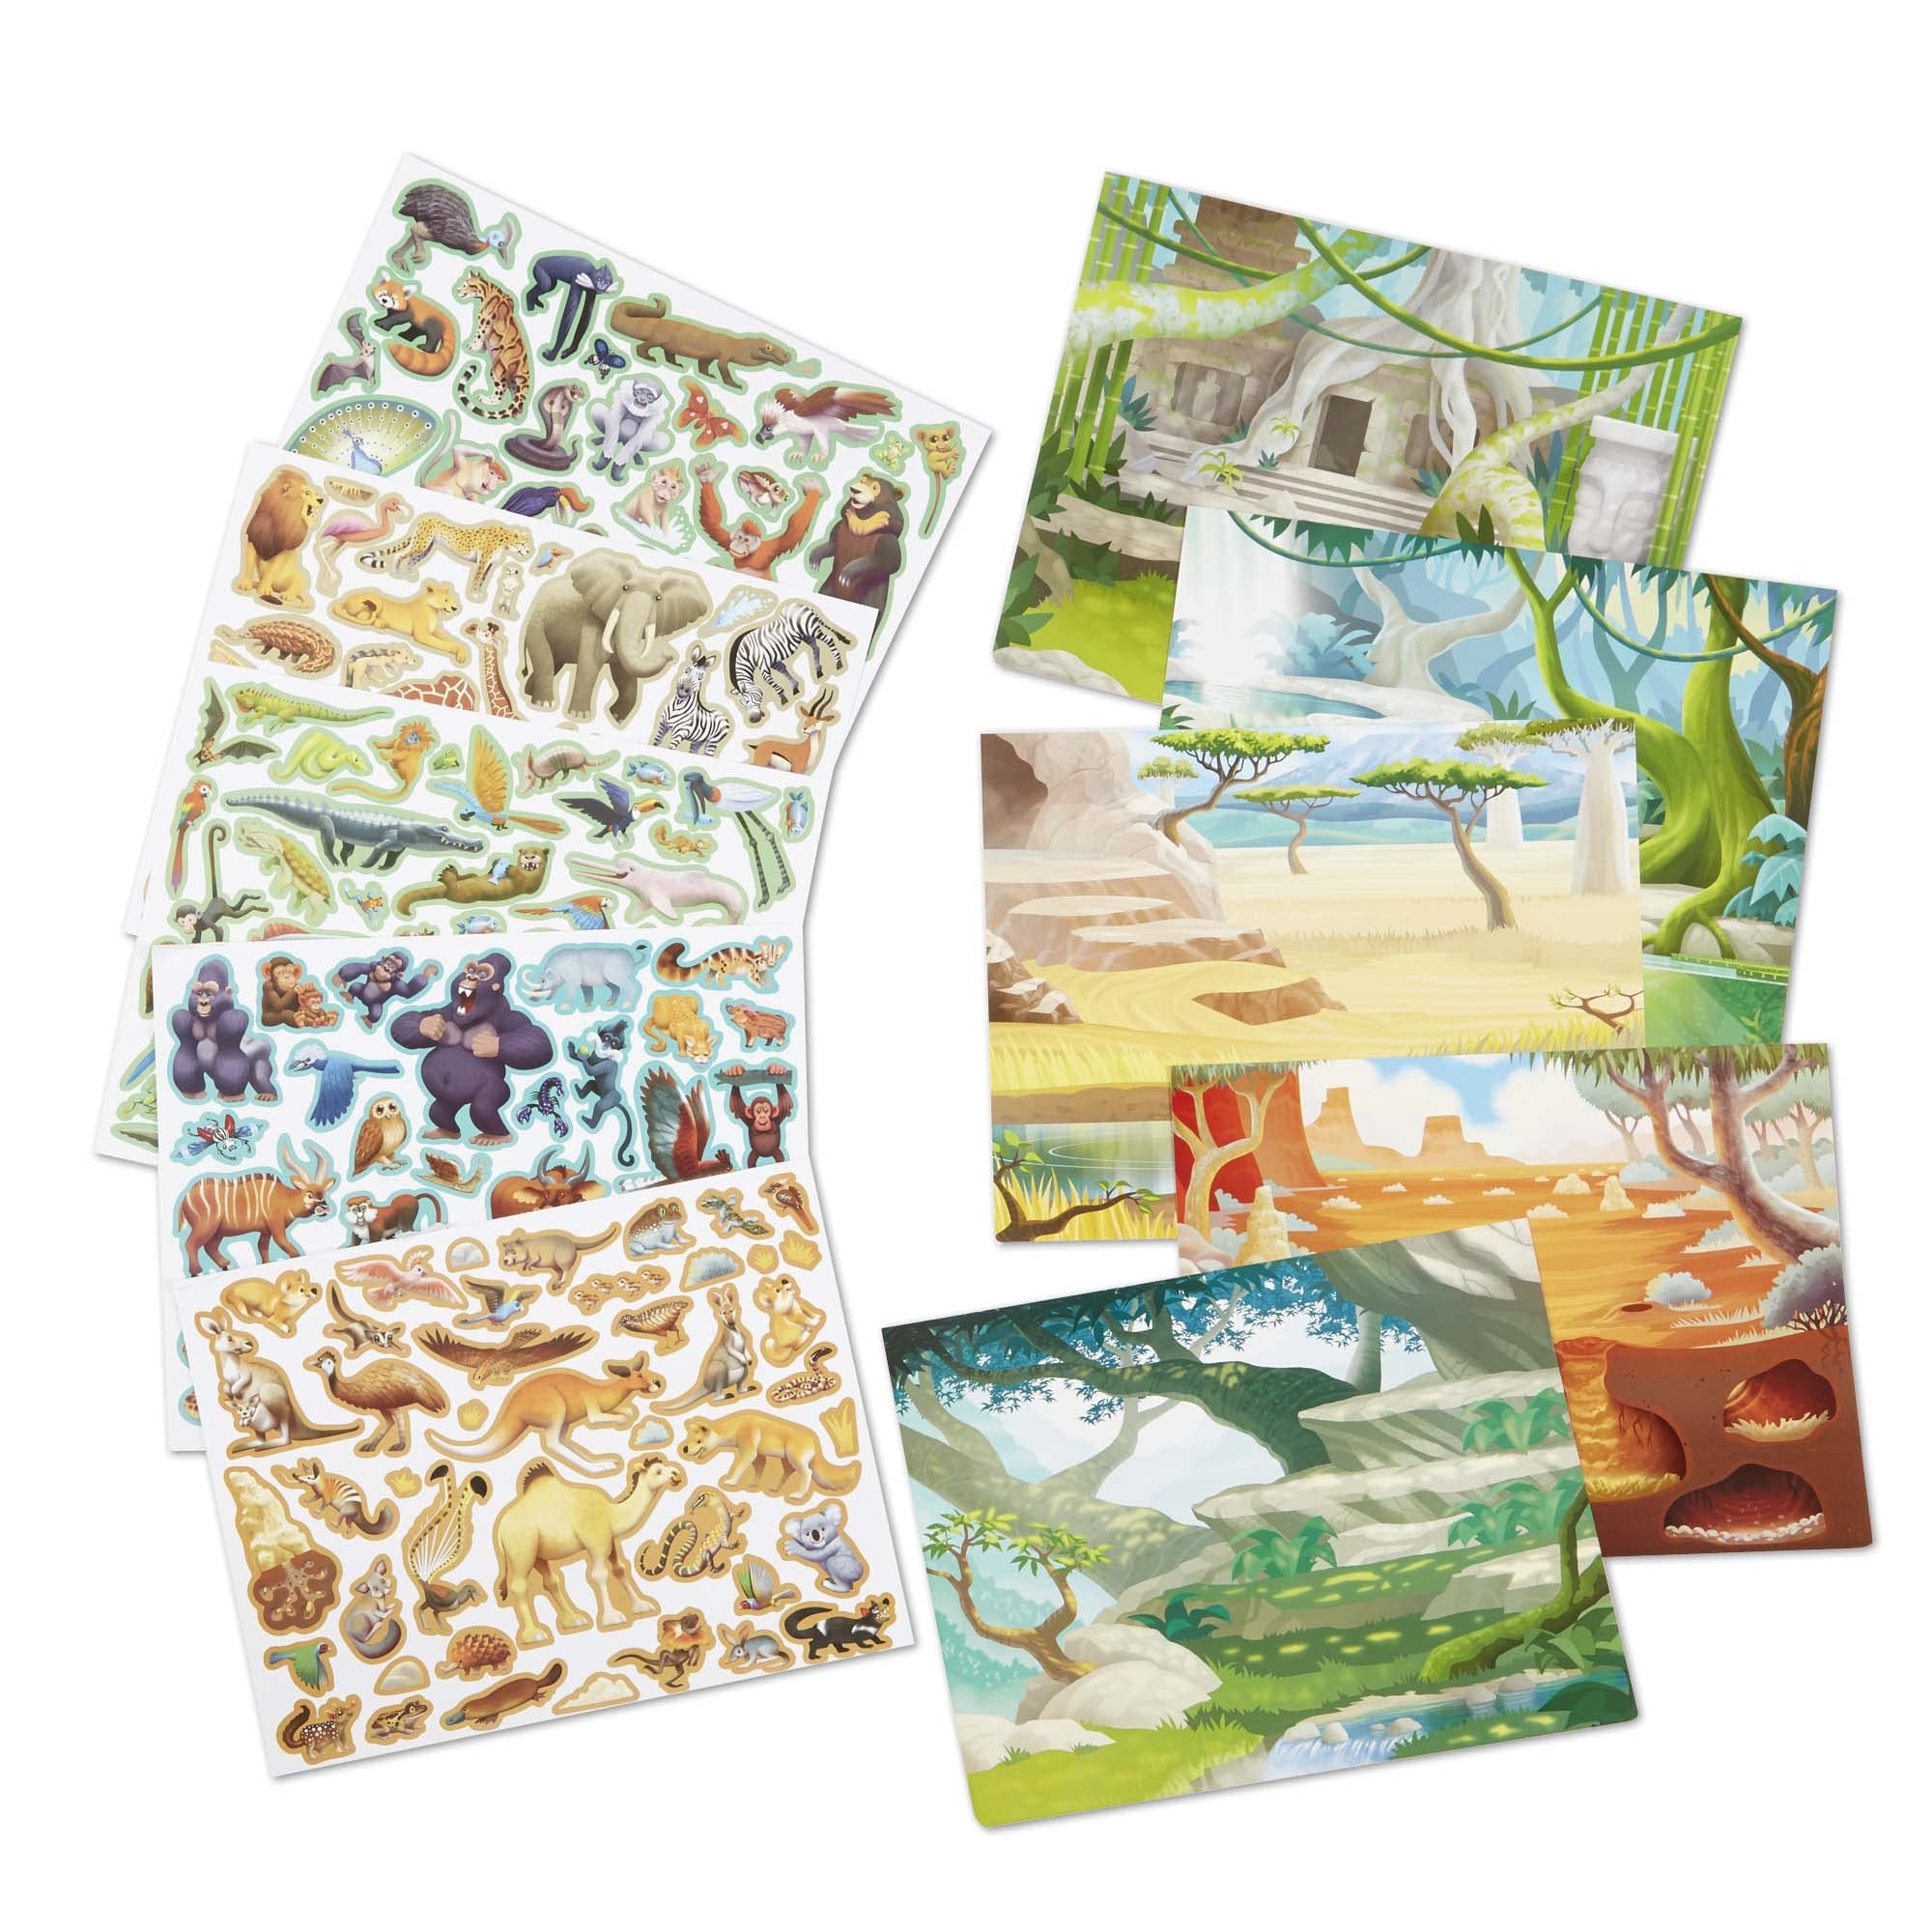 Melissa & Doug Reusable Sticker Pad Bundle - Jungle, Farm & Under the Sea - Art Activities For Kids, Restickable Stickers, Arts And Crafts For Kids Ages 3+